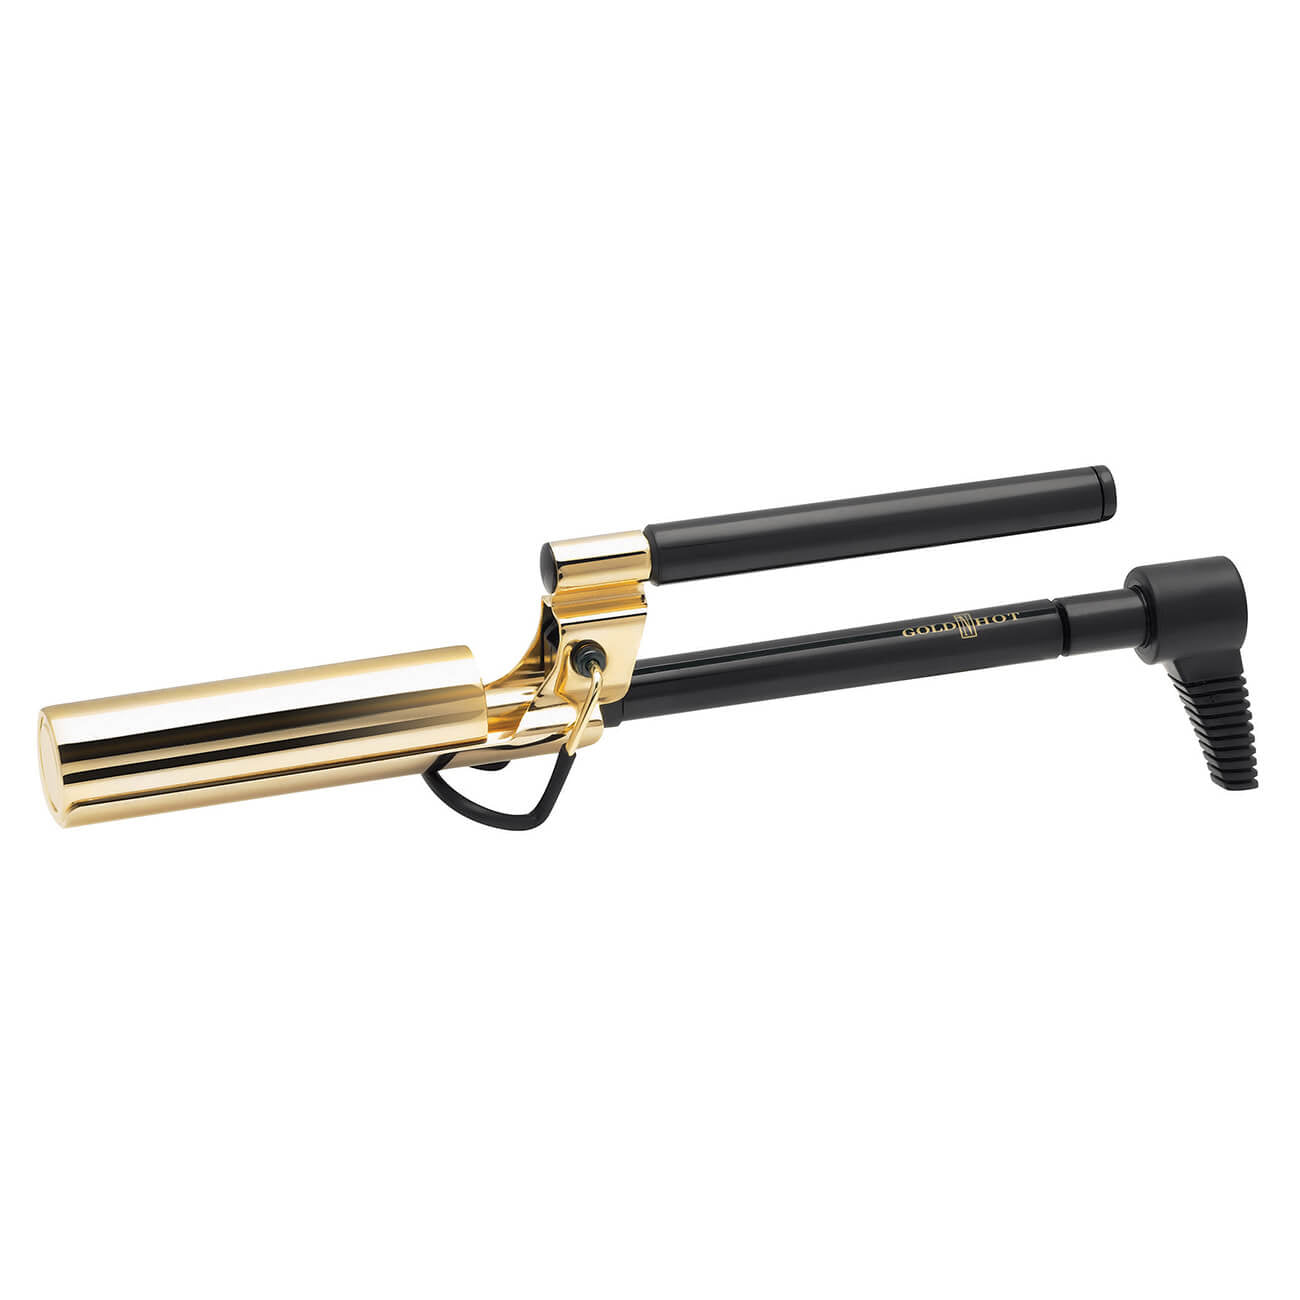 Gold 'N Hot 1" Spring Curling Iron